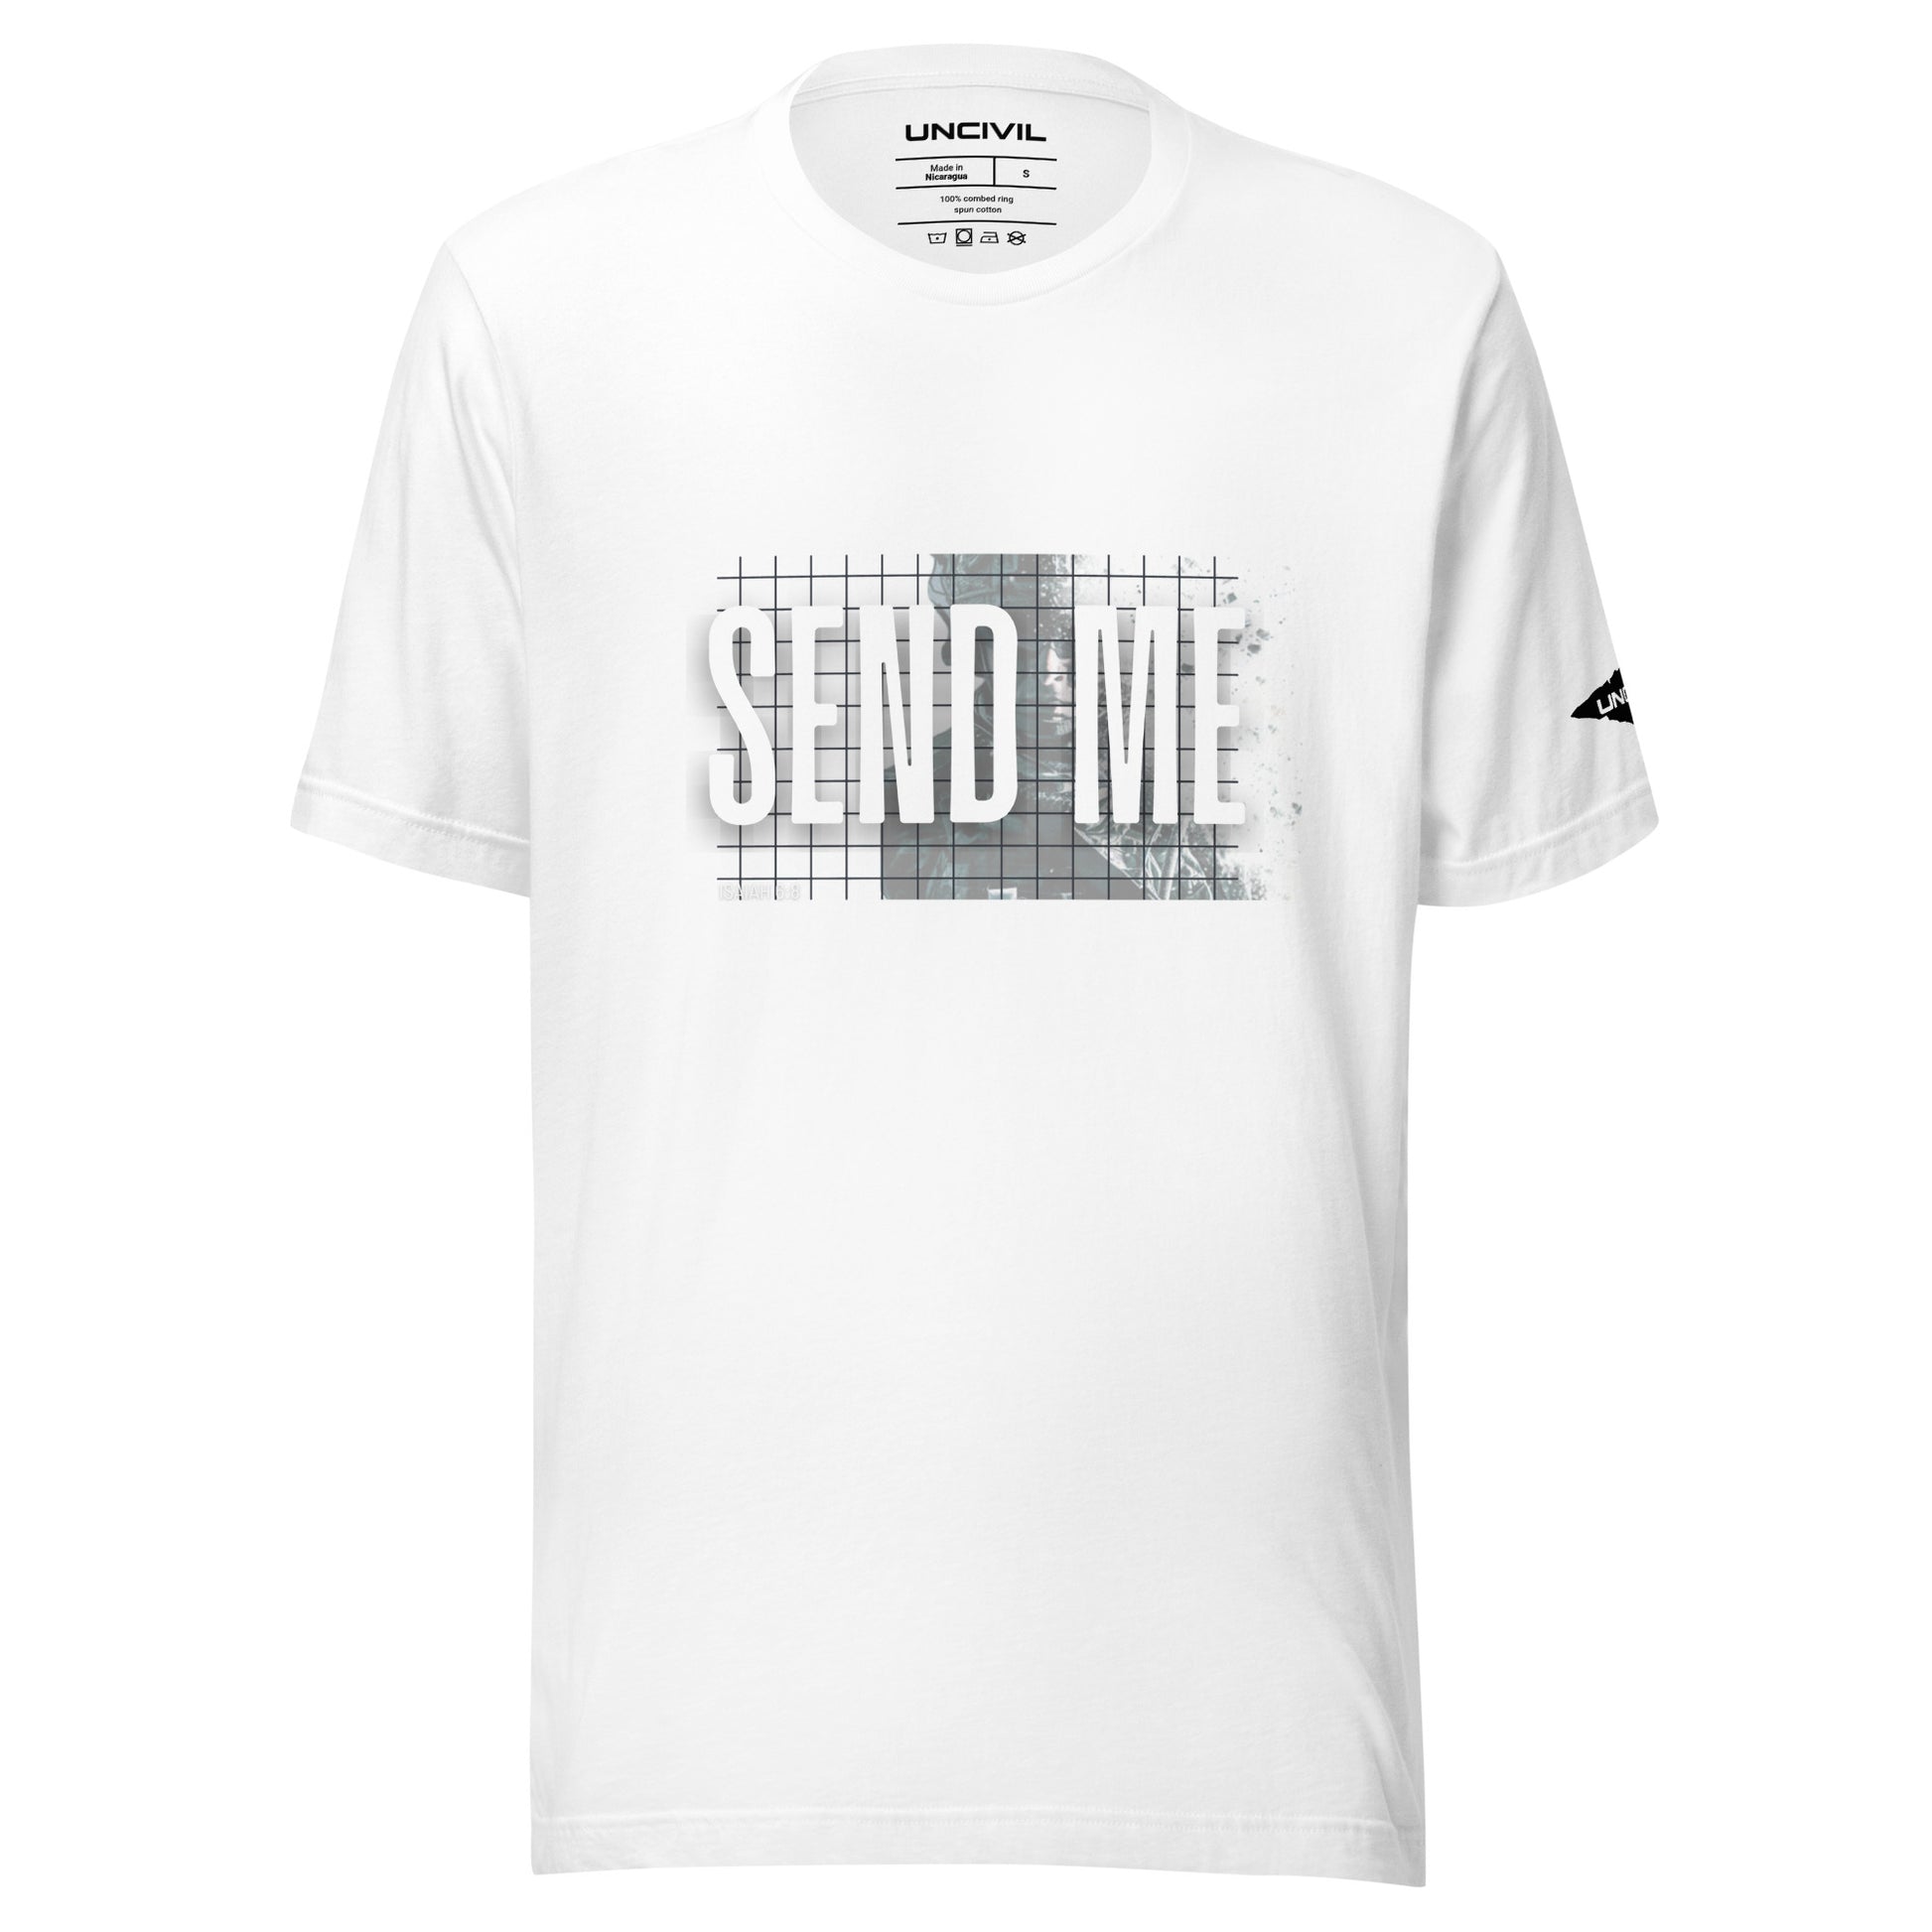 Send Me Isaiah 6:8 shirt, white graphic tee featuring a soldier. Men 's shirt.